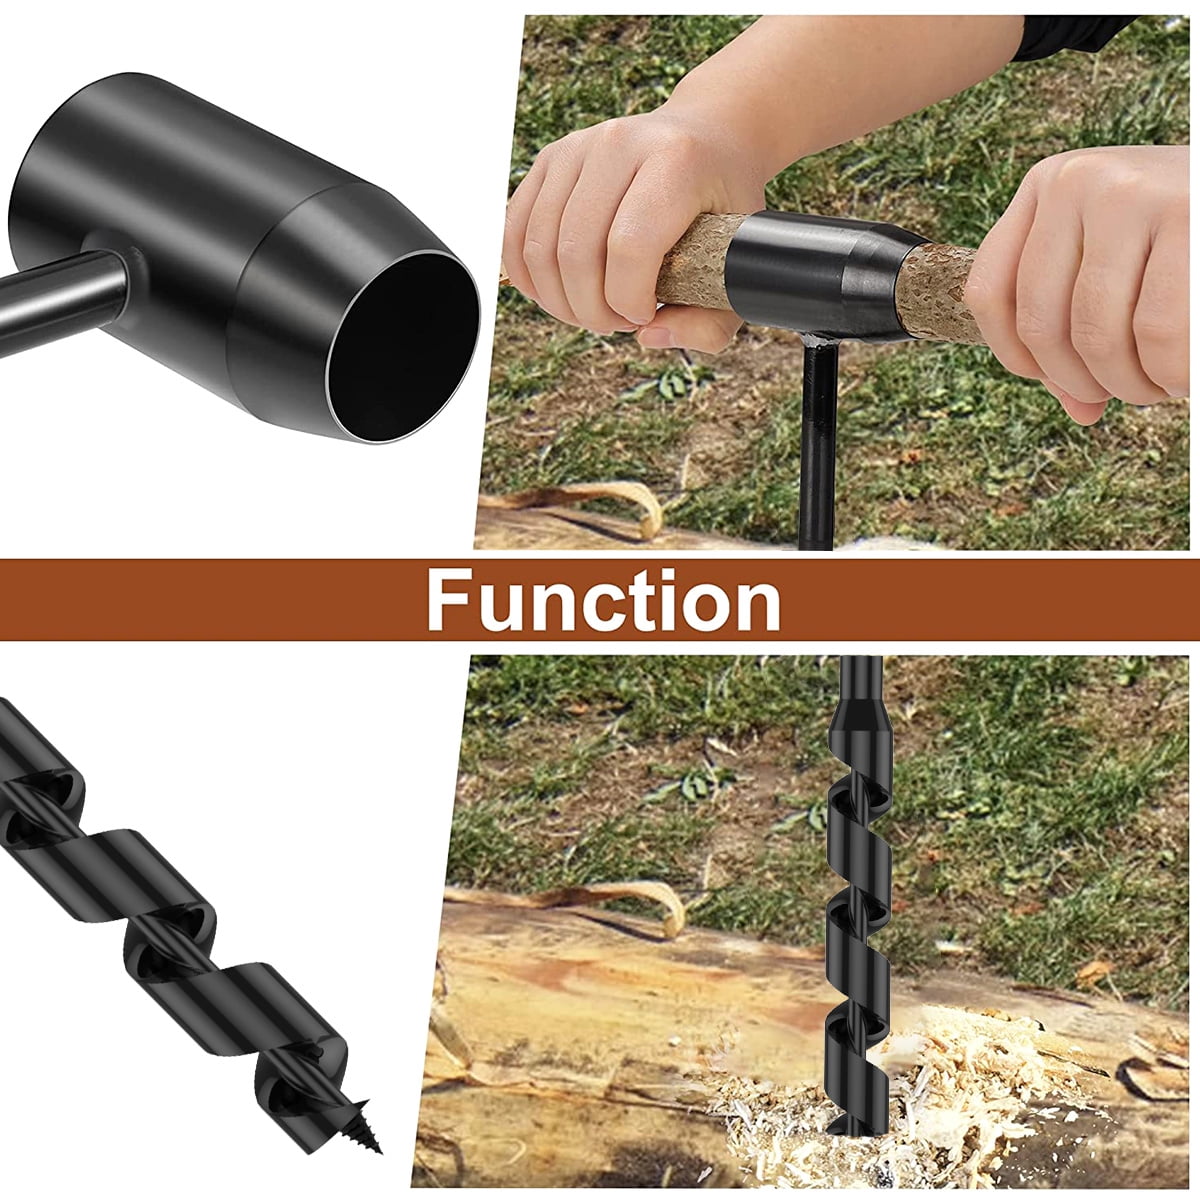 Thren Bushcraft Hand Drill Carbon Steel Manual Auger Drill Portable Hand Survival Drill Bit Hole Punch Tool for Outdoor Camping Hiking, Size: 0.75 x